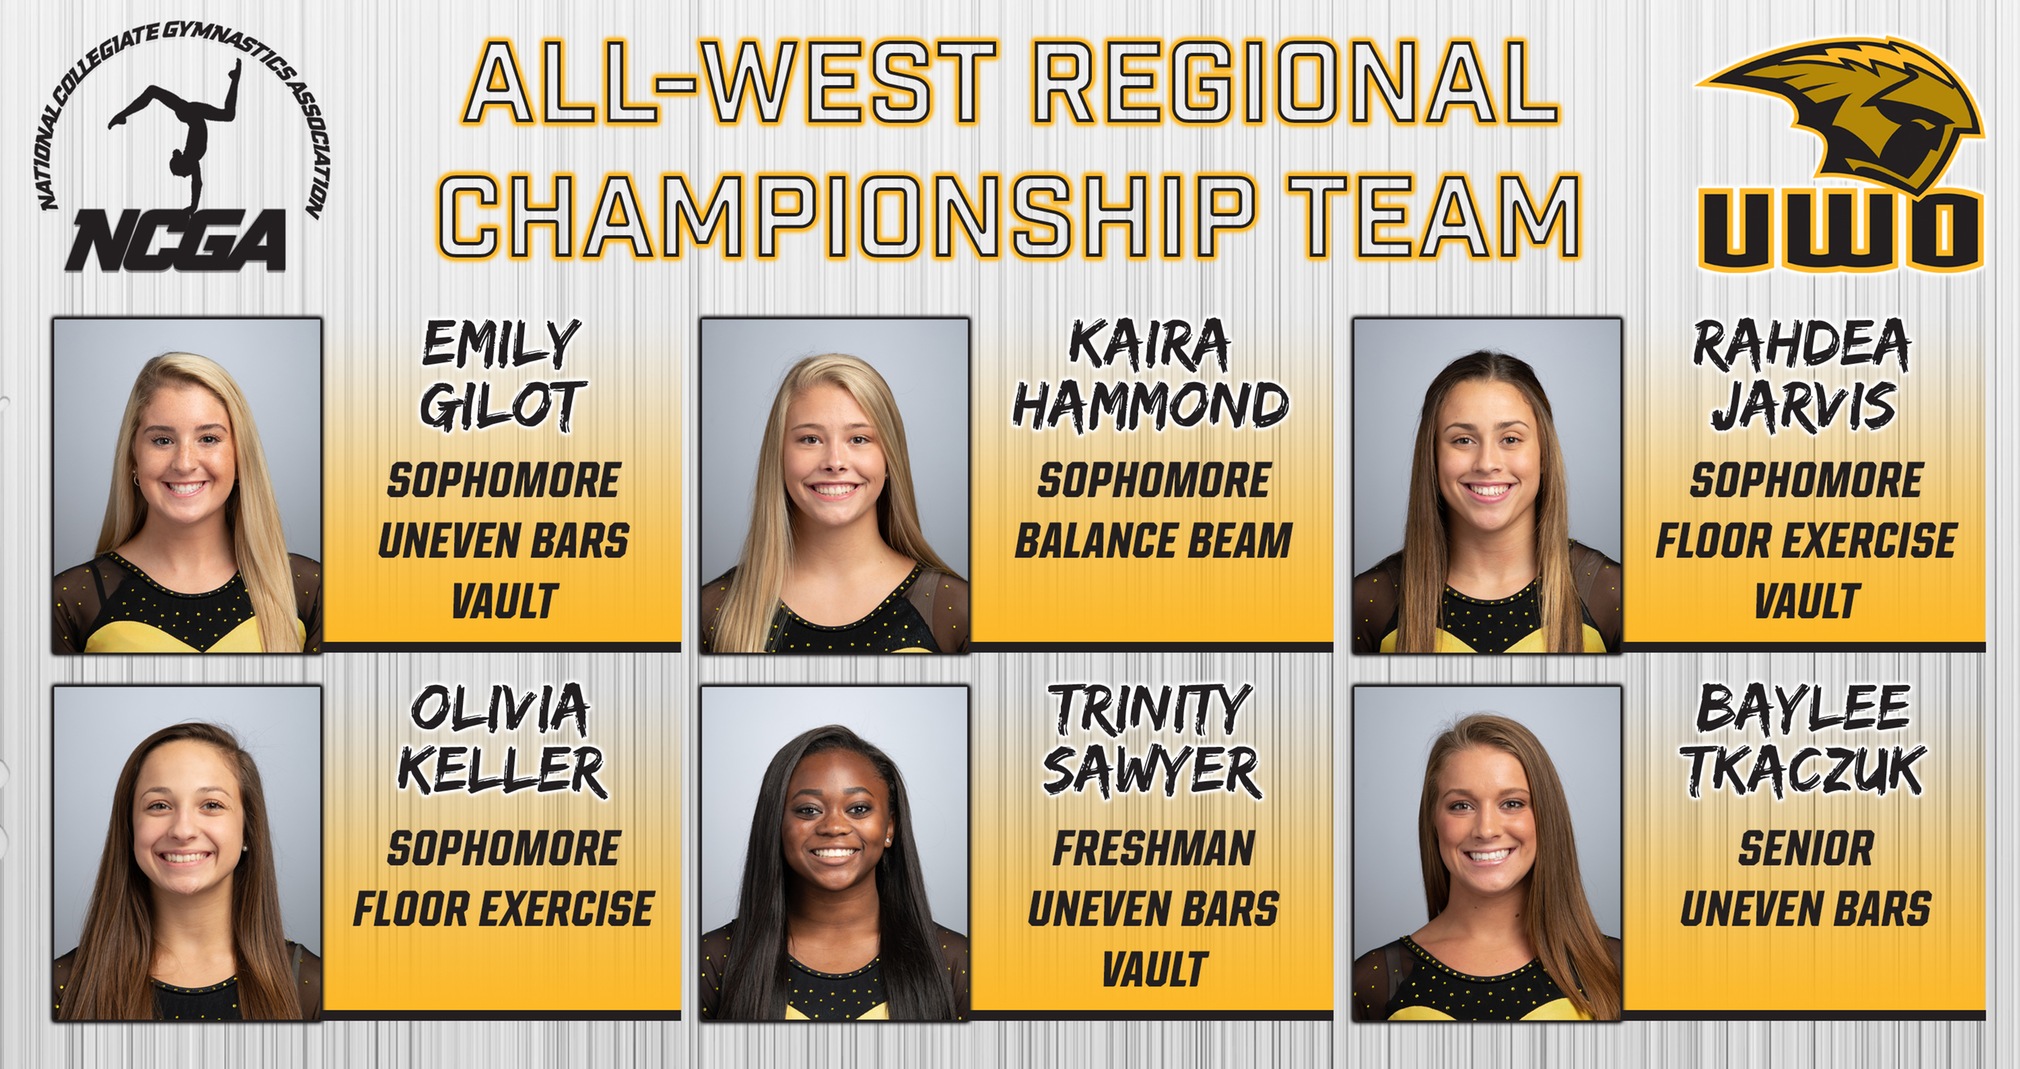 Six Titans Named To All-West Regional Championship Team